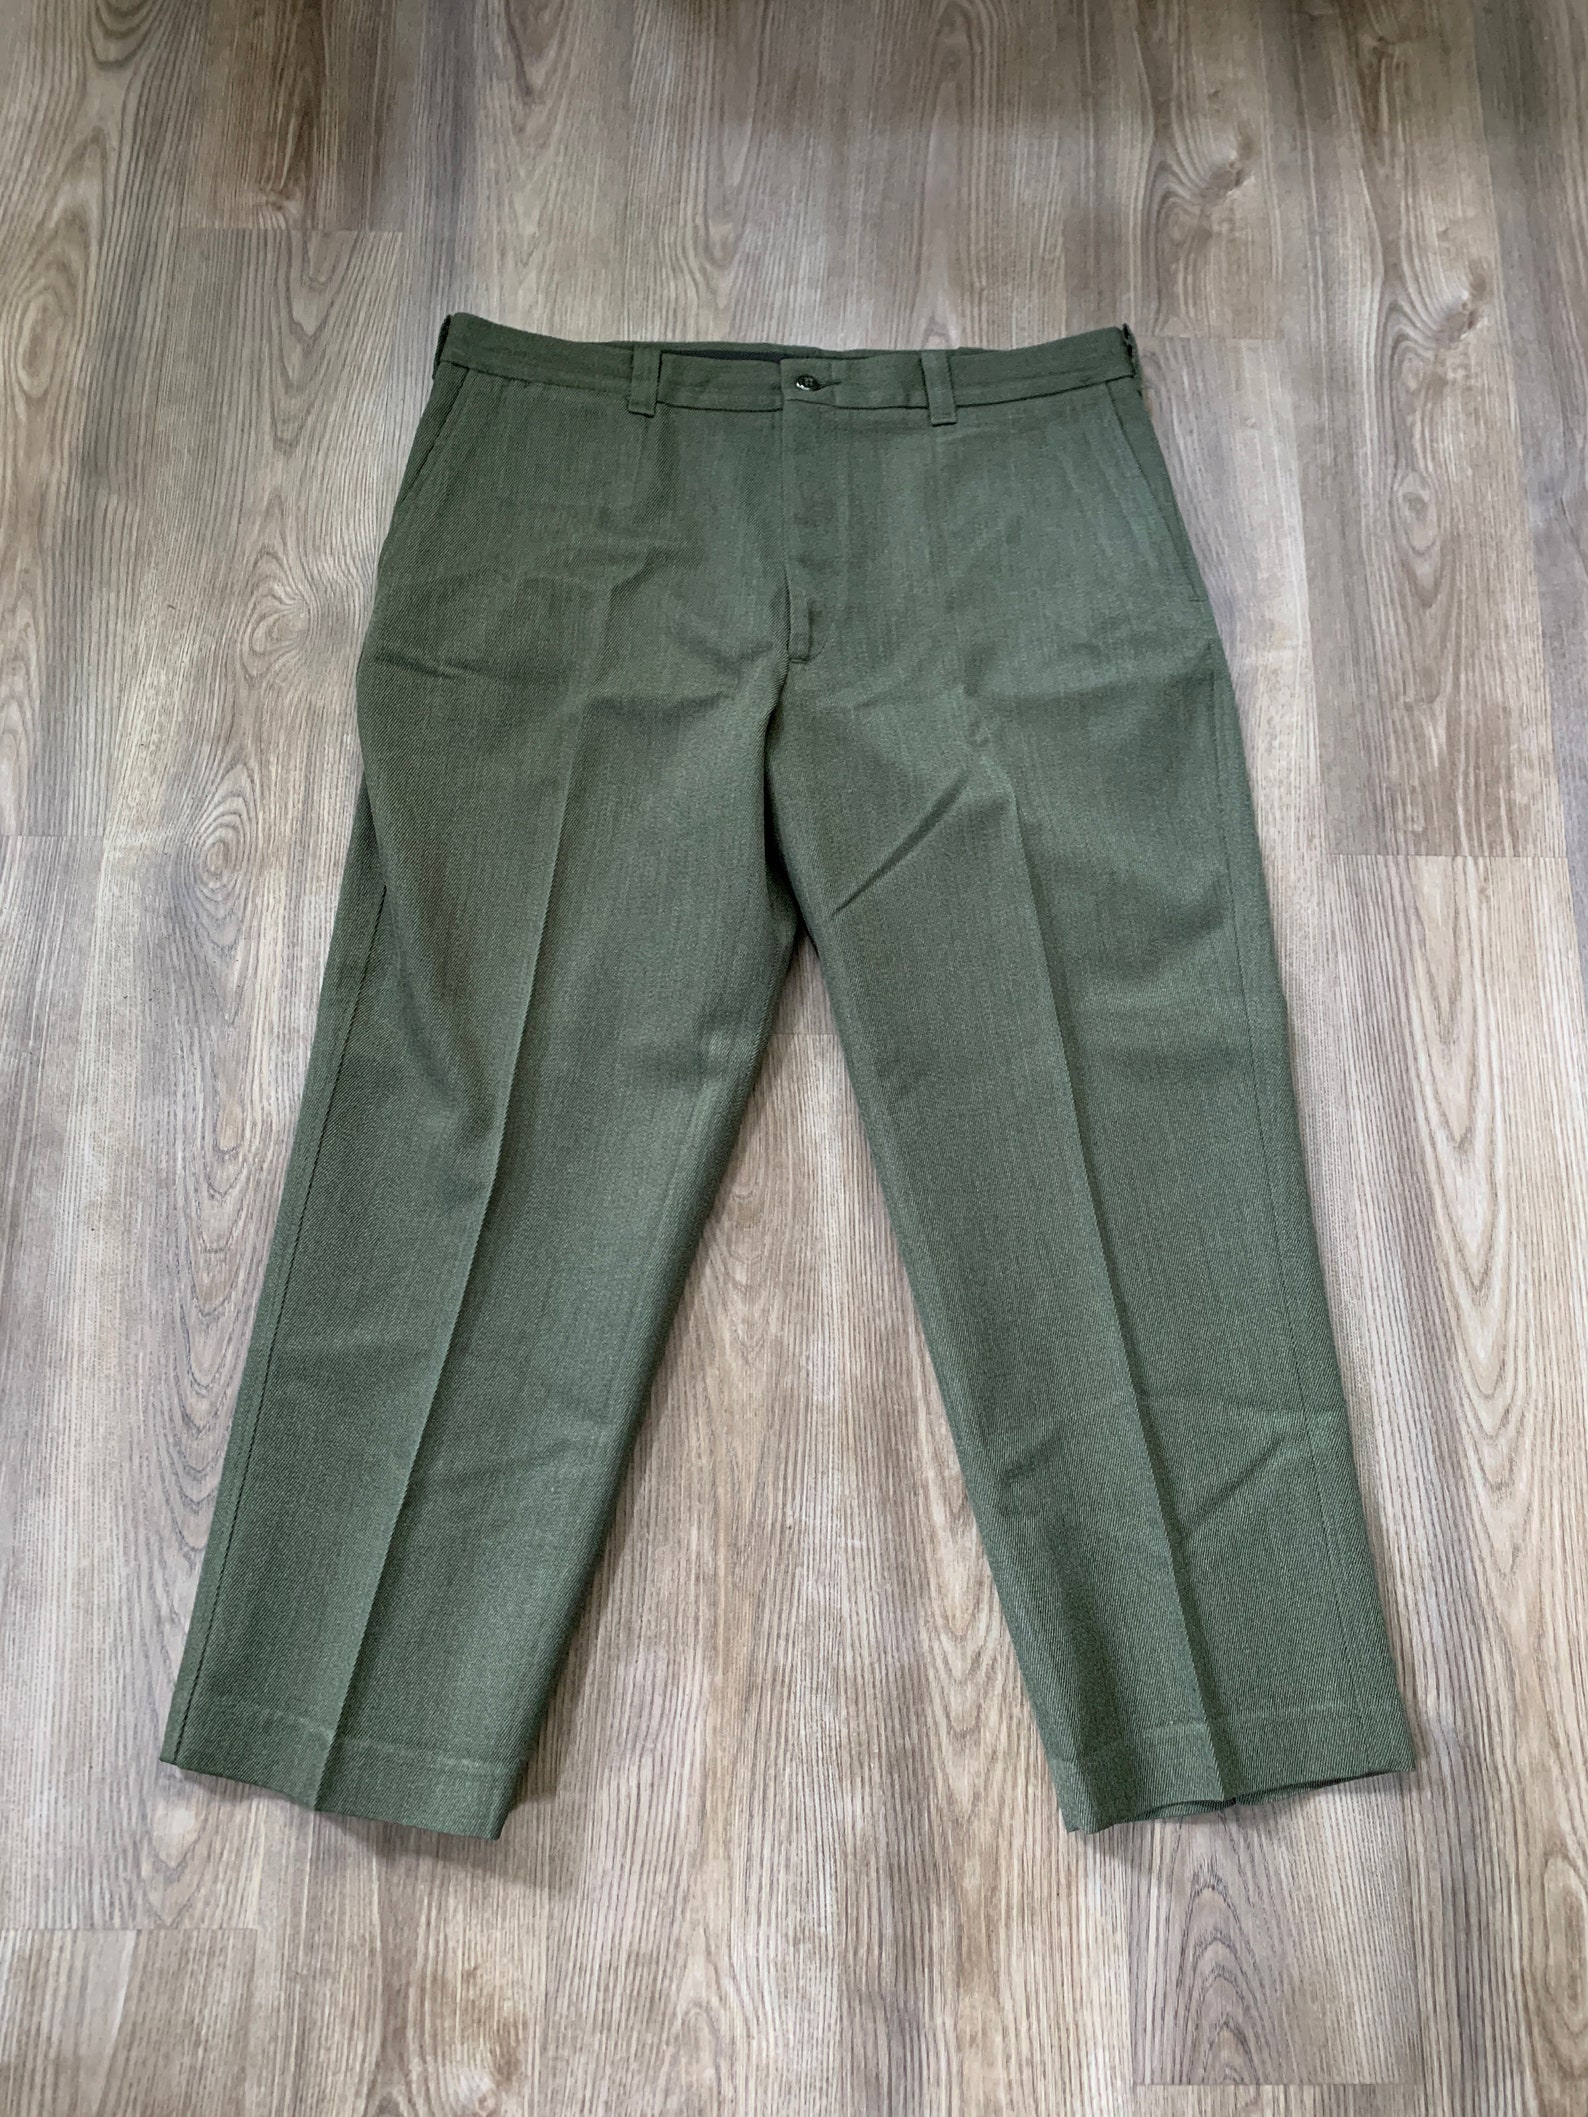 Vintage 80s Filson Green Wool Whipcord Pants 42x29 | Etsy UK